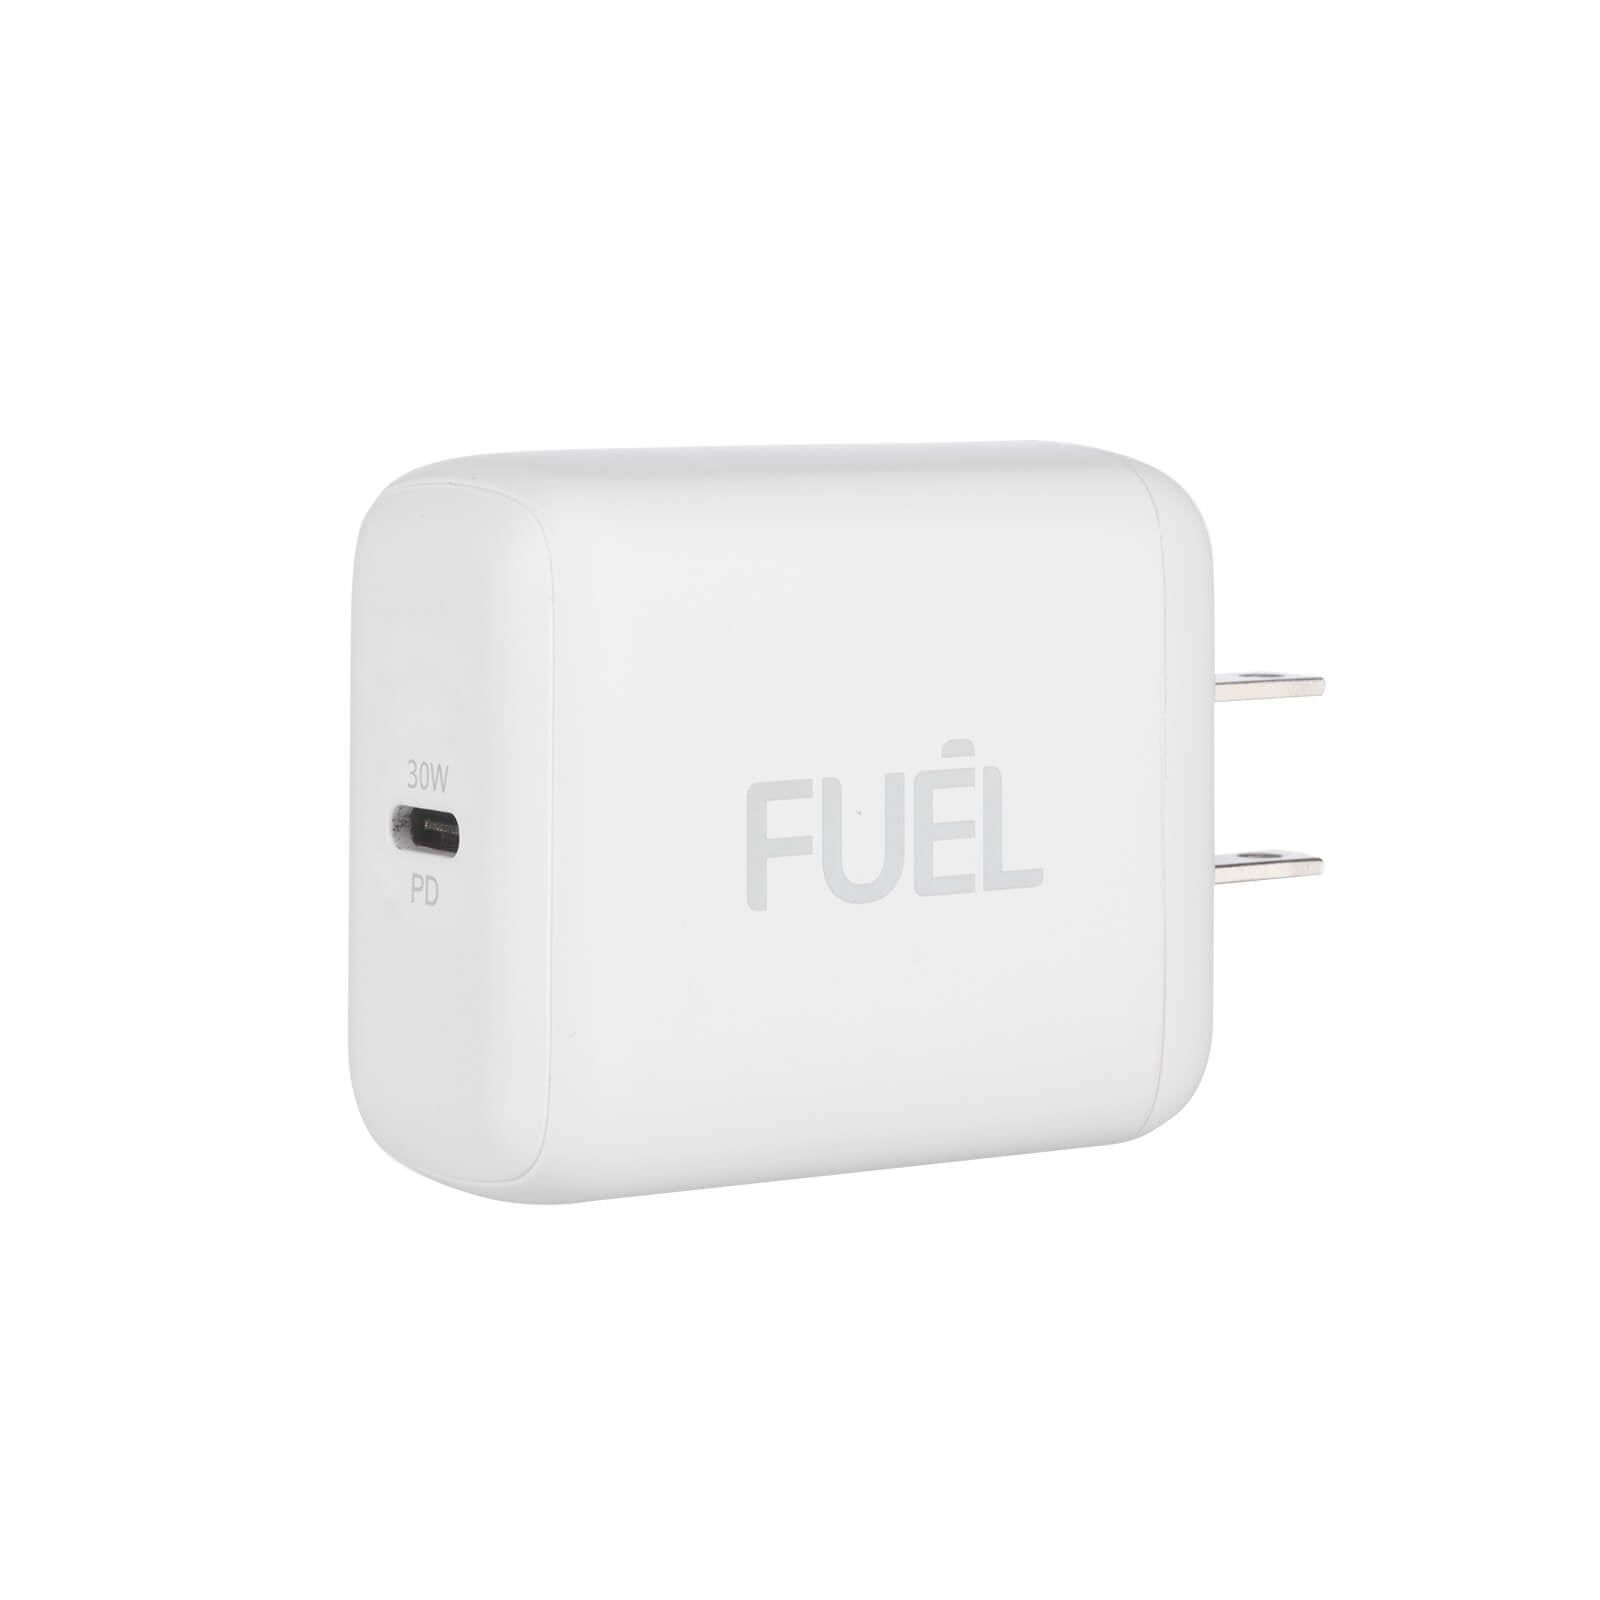 FUEL 30W USB C PD Power Adapter color::White